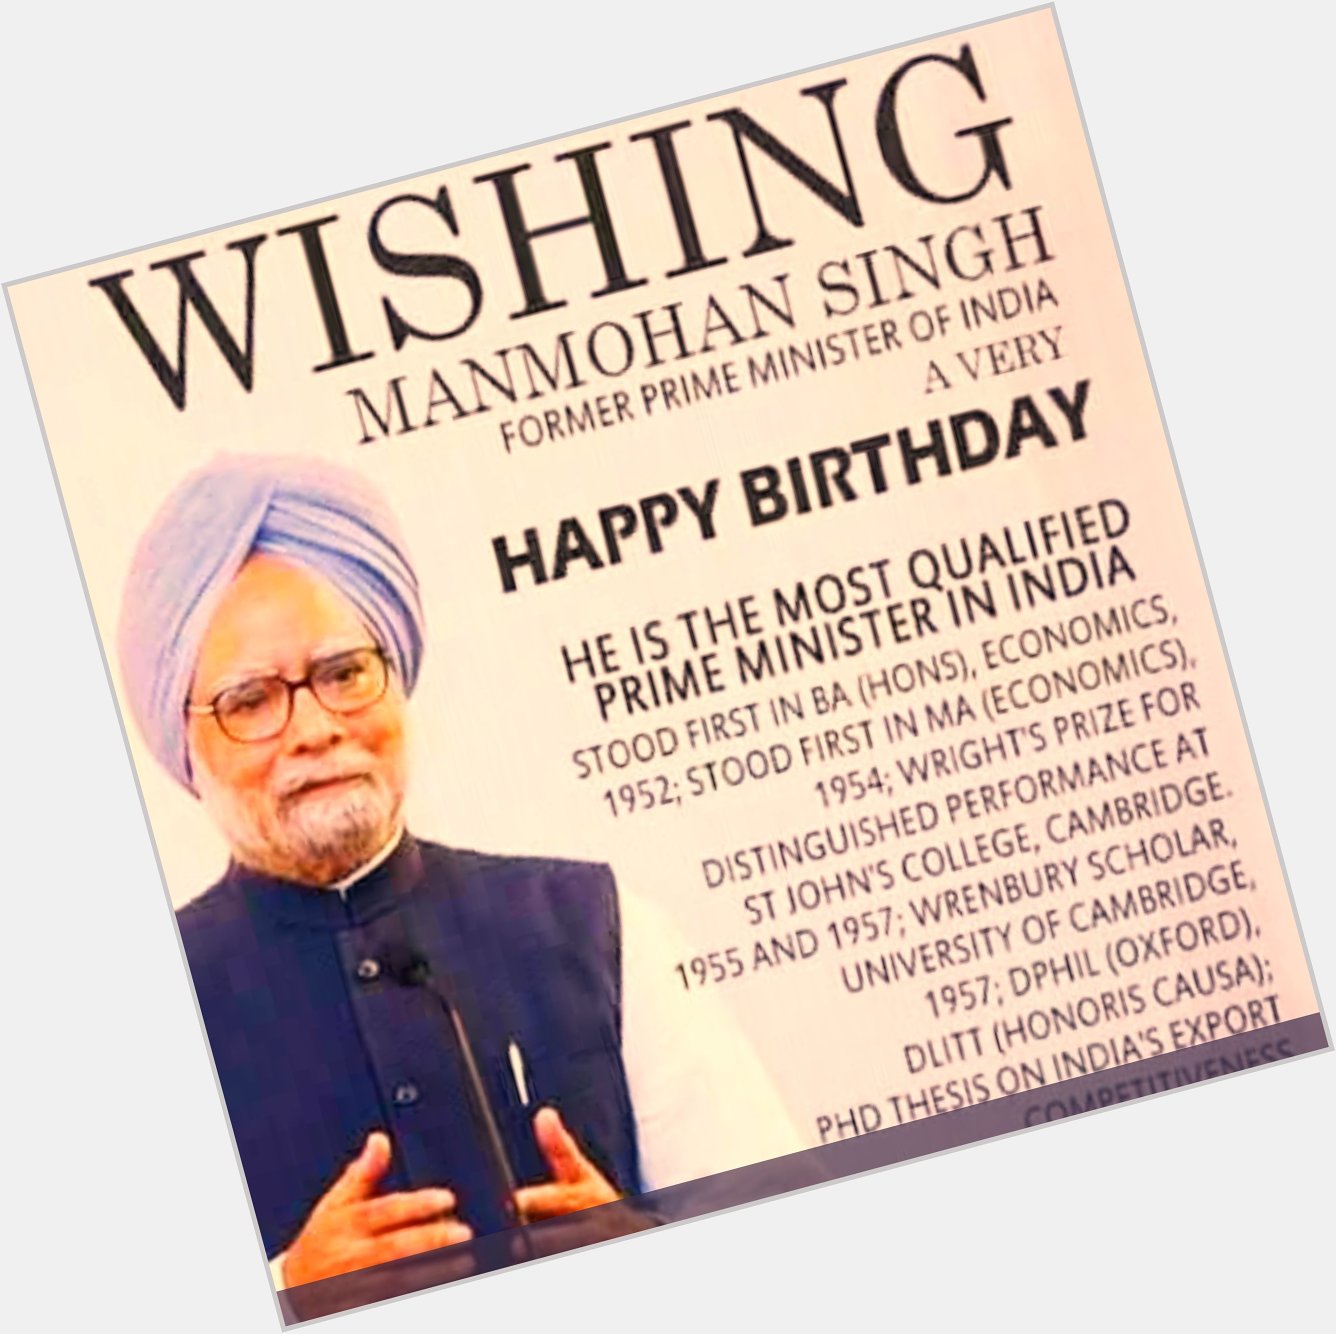 HAPPY BIRTHDAY TO
Dr Manmohan Singh
Needs nothing more to be added 